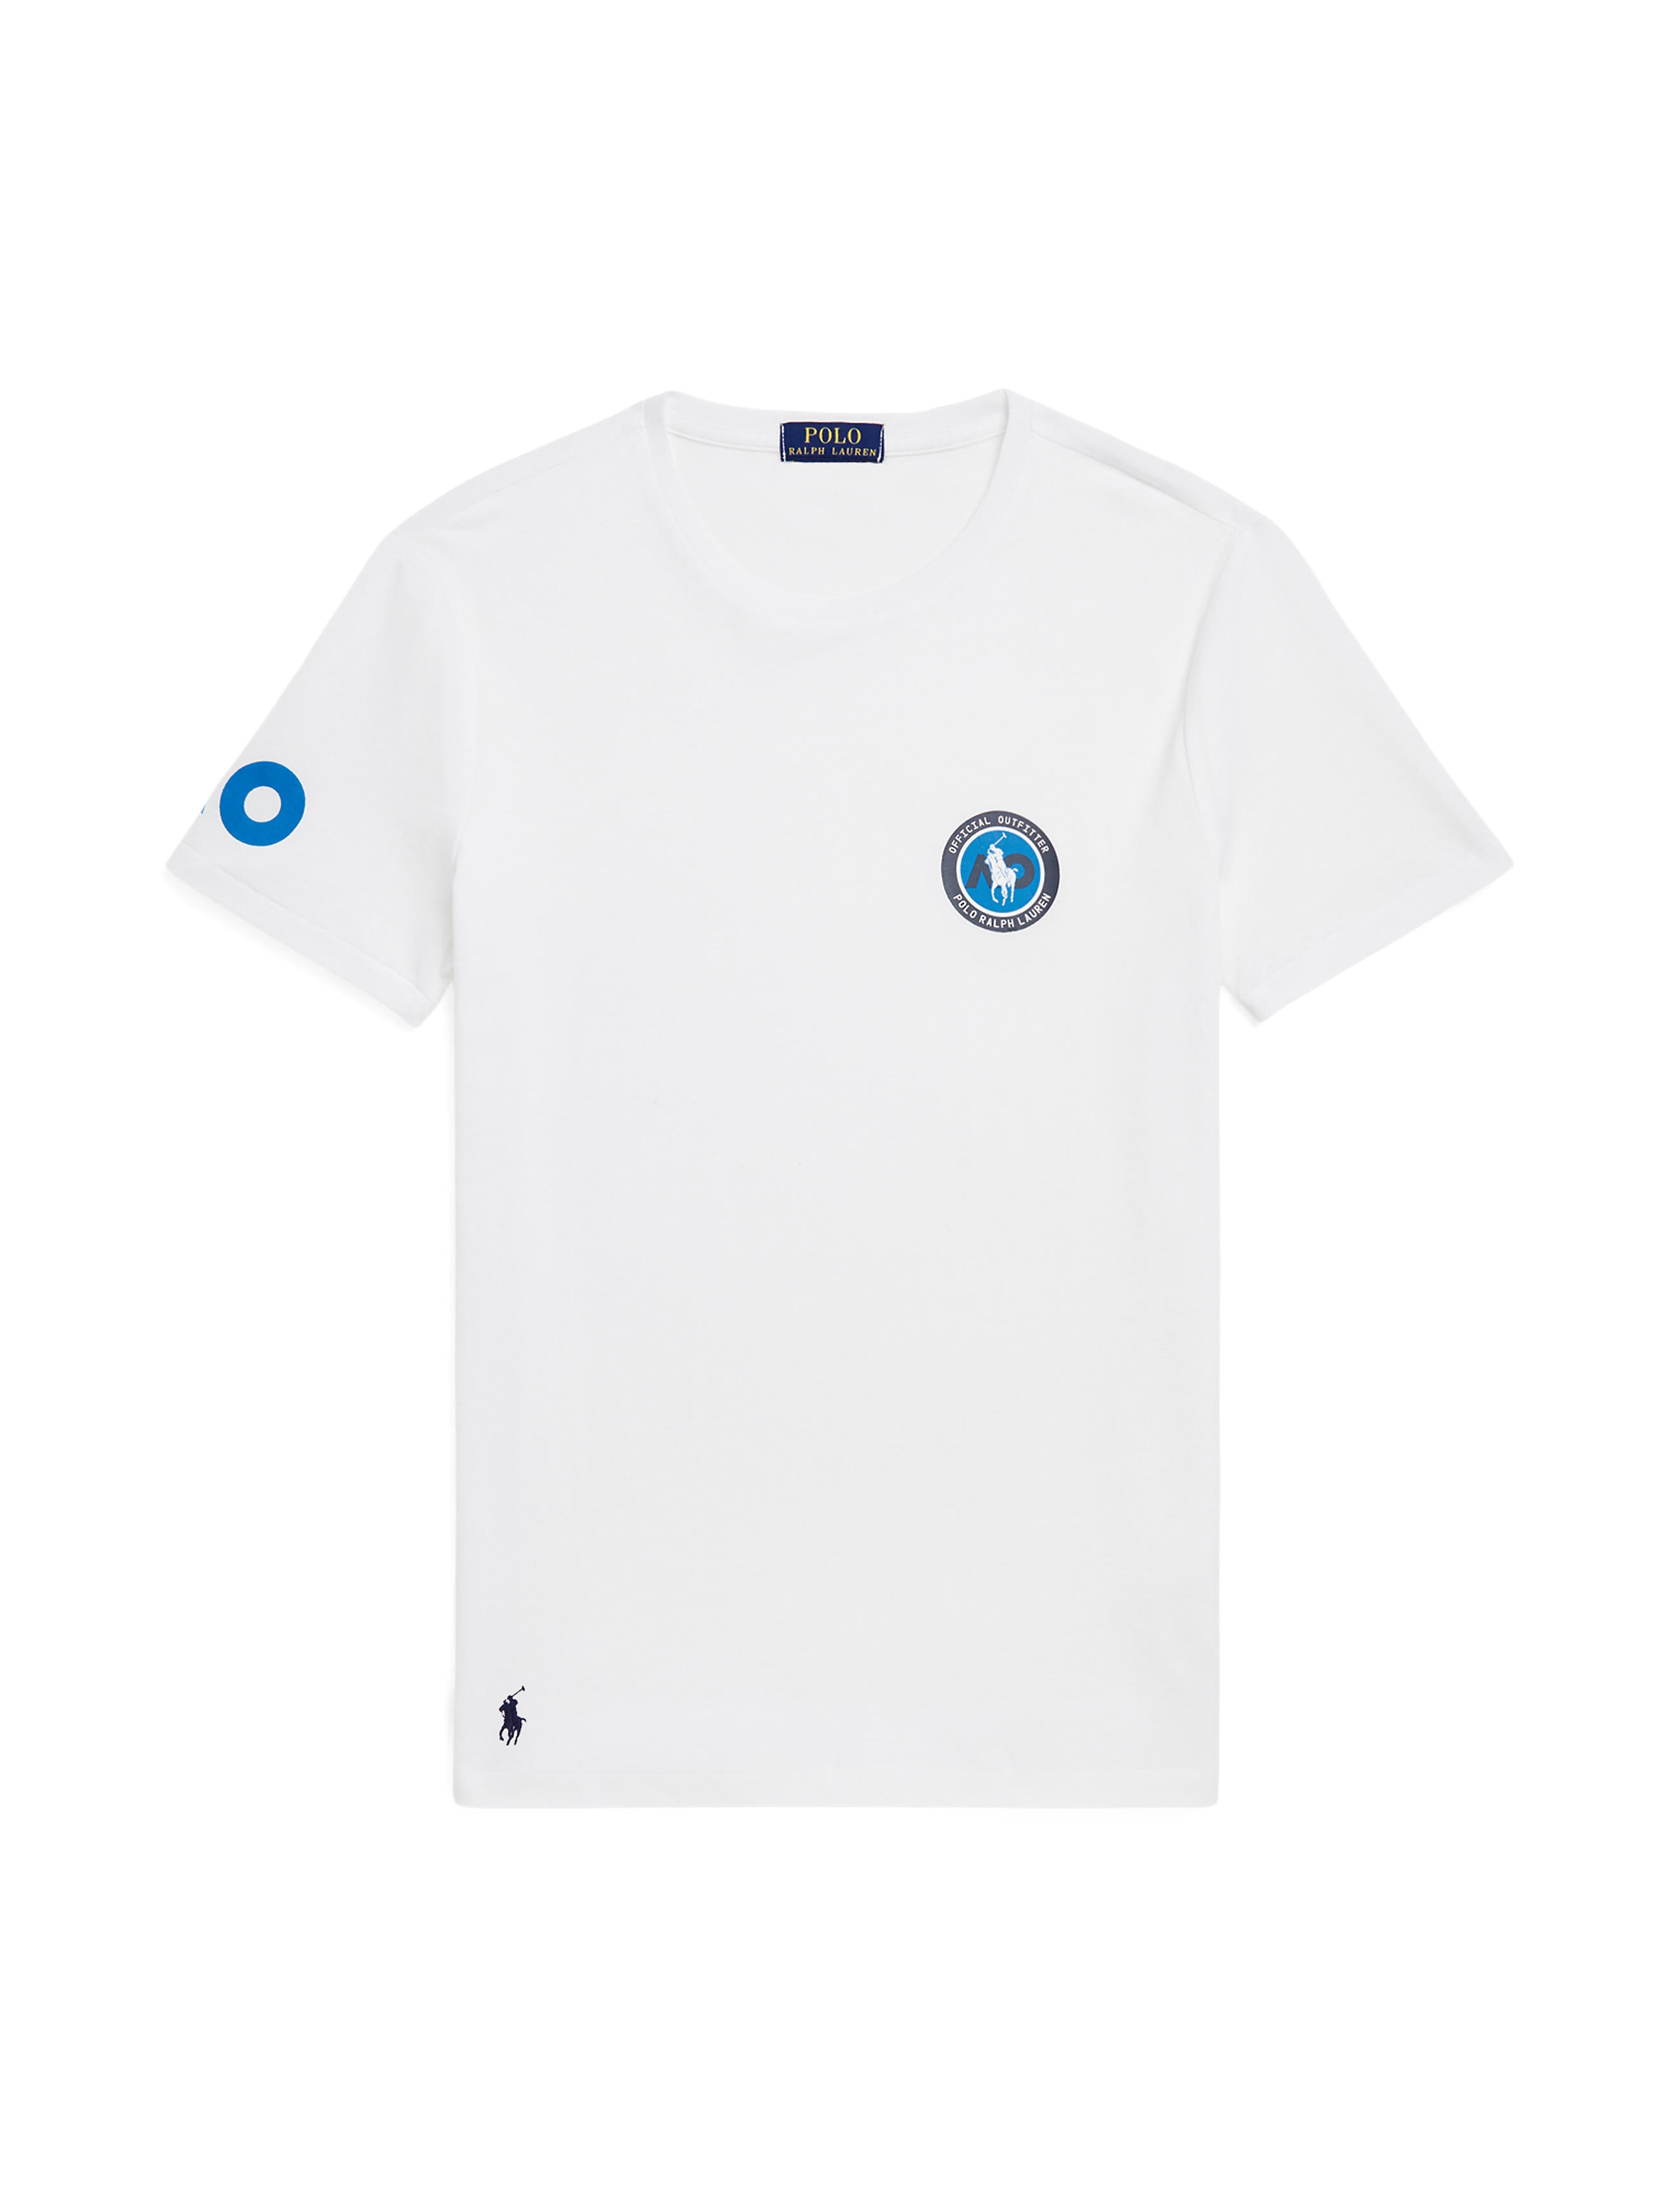 Men's T-Shirt with Pocket - White – AO Official Store